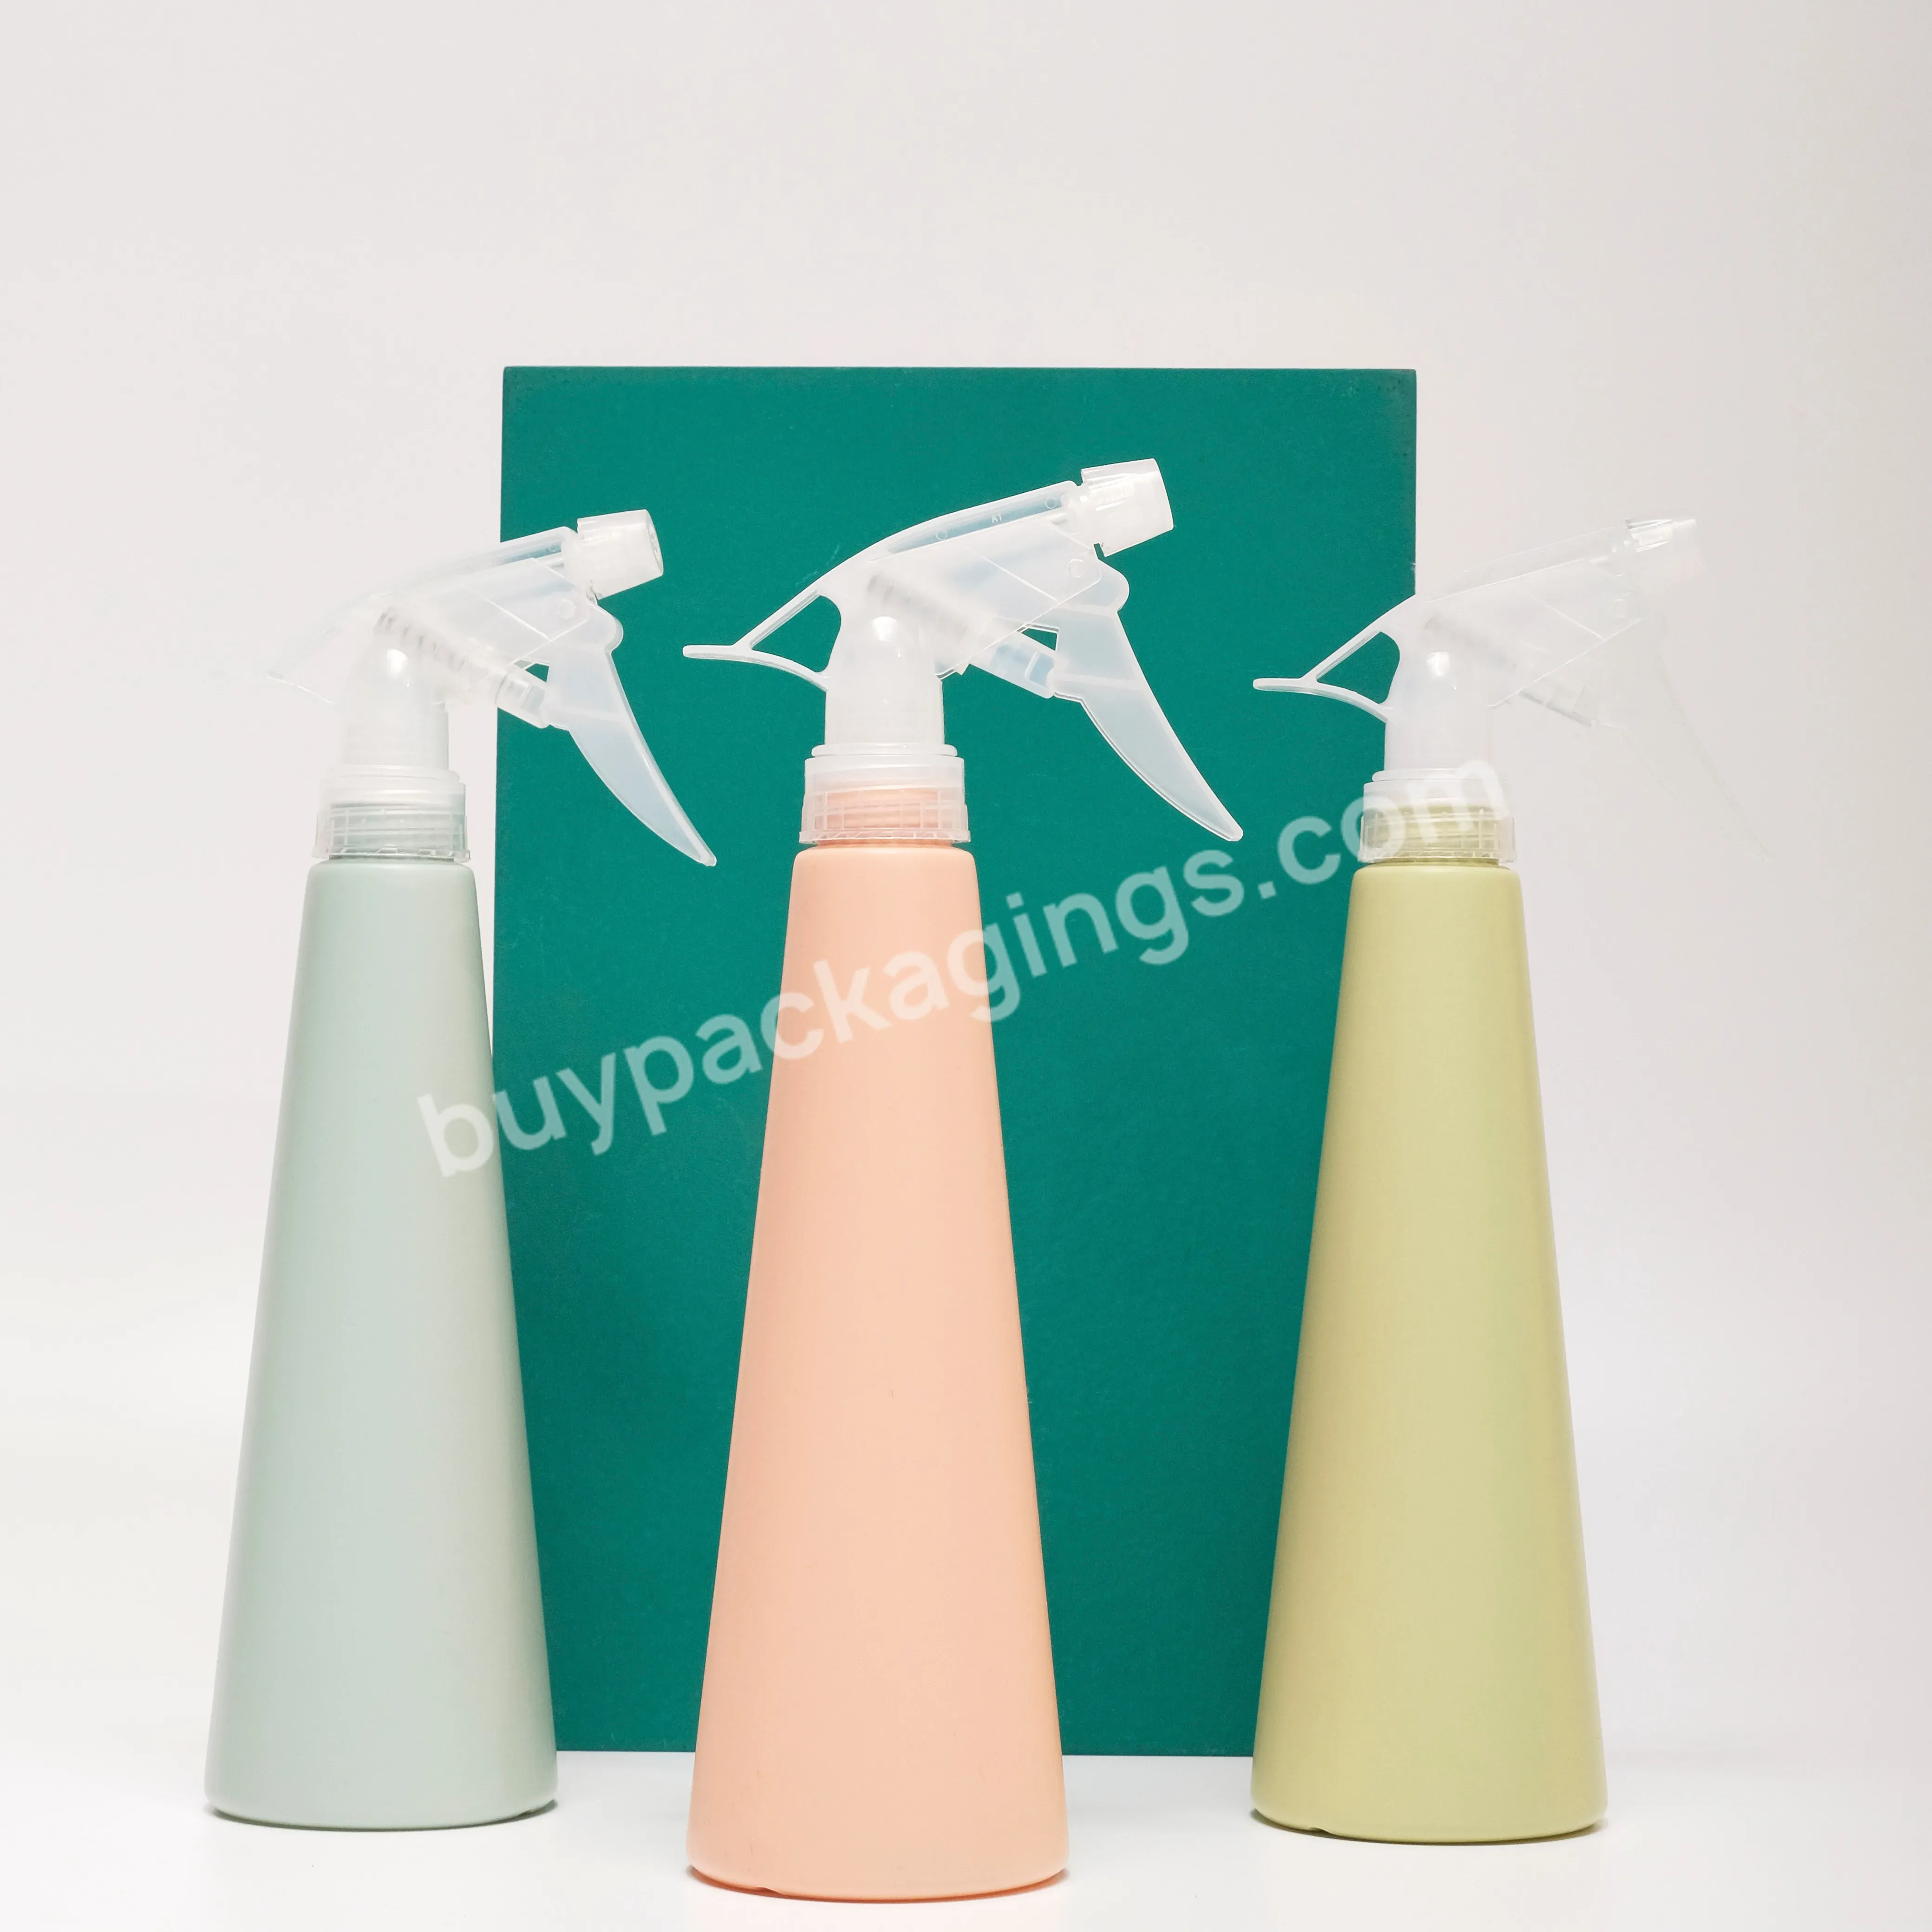 Household Watering Can Small Candy Colored Watering Sprayer Pressure Sprayer - Buy Nordic Style Spray Bottle Household Watering Can Small,Air Pressure High Pressure Watering Can Candy Colored Watering Can,Indoor Sprayer Watering Can Pressure Sprayer